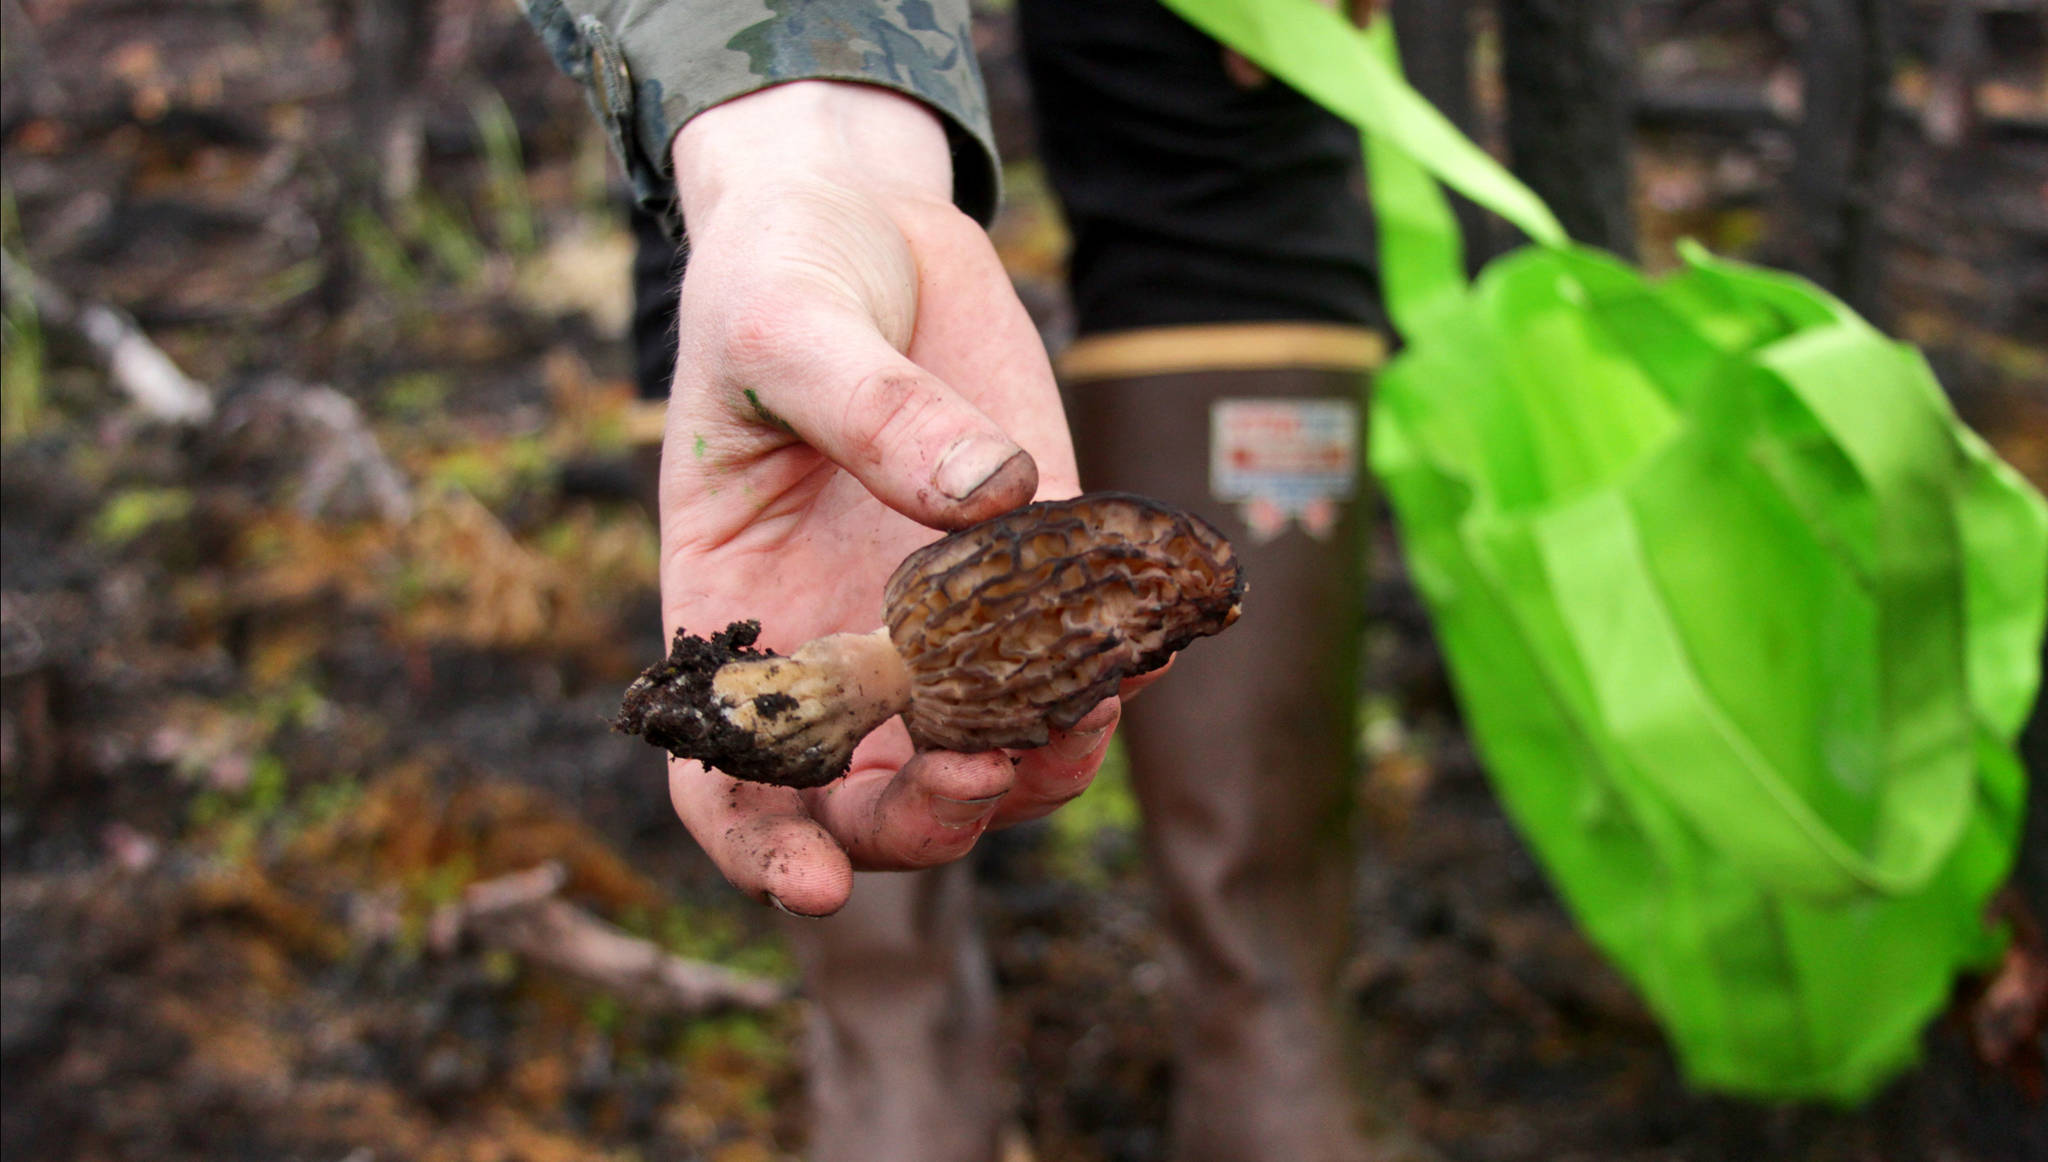 Kat Sorensen holds an average-sized specimen of morel mushroom that she harvested May 26 near Sterling. Though early in the season, Sorensen and a party of three other hunters found about 30 small- to mid-size morels, which they later fried and ate.